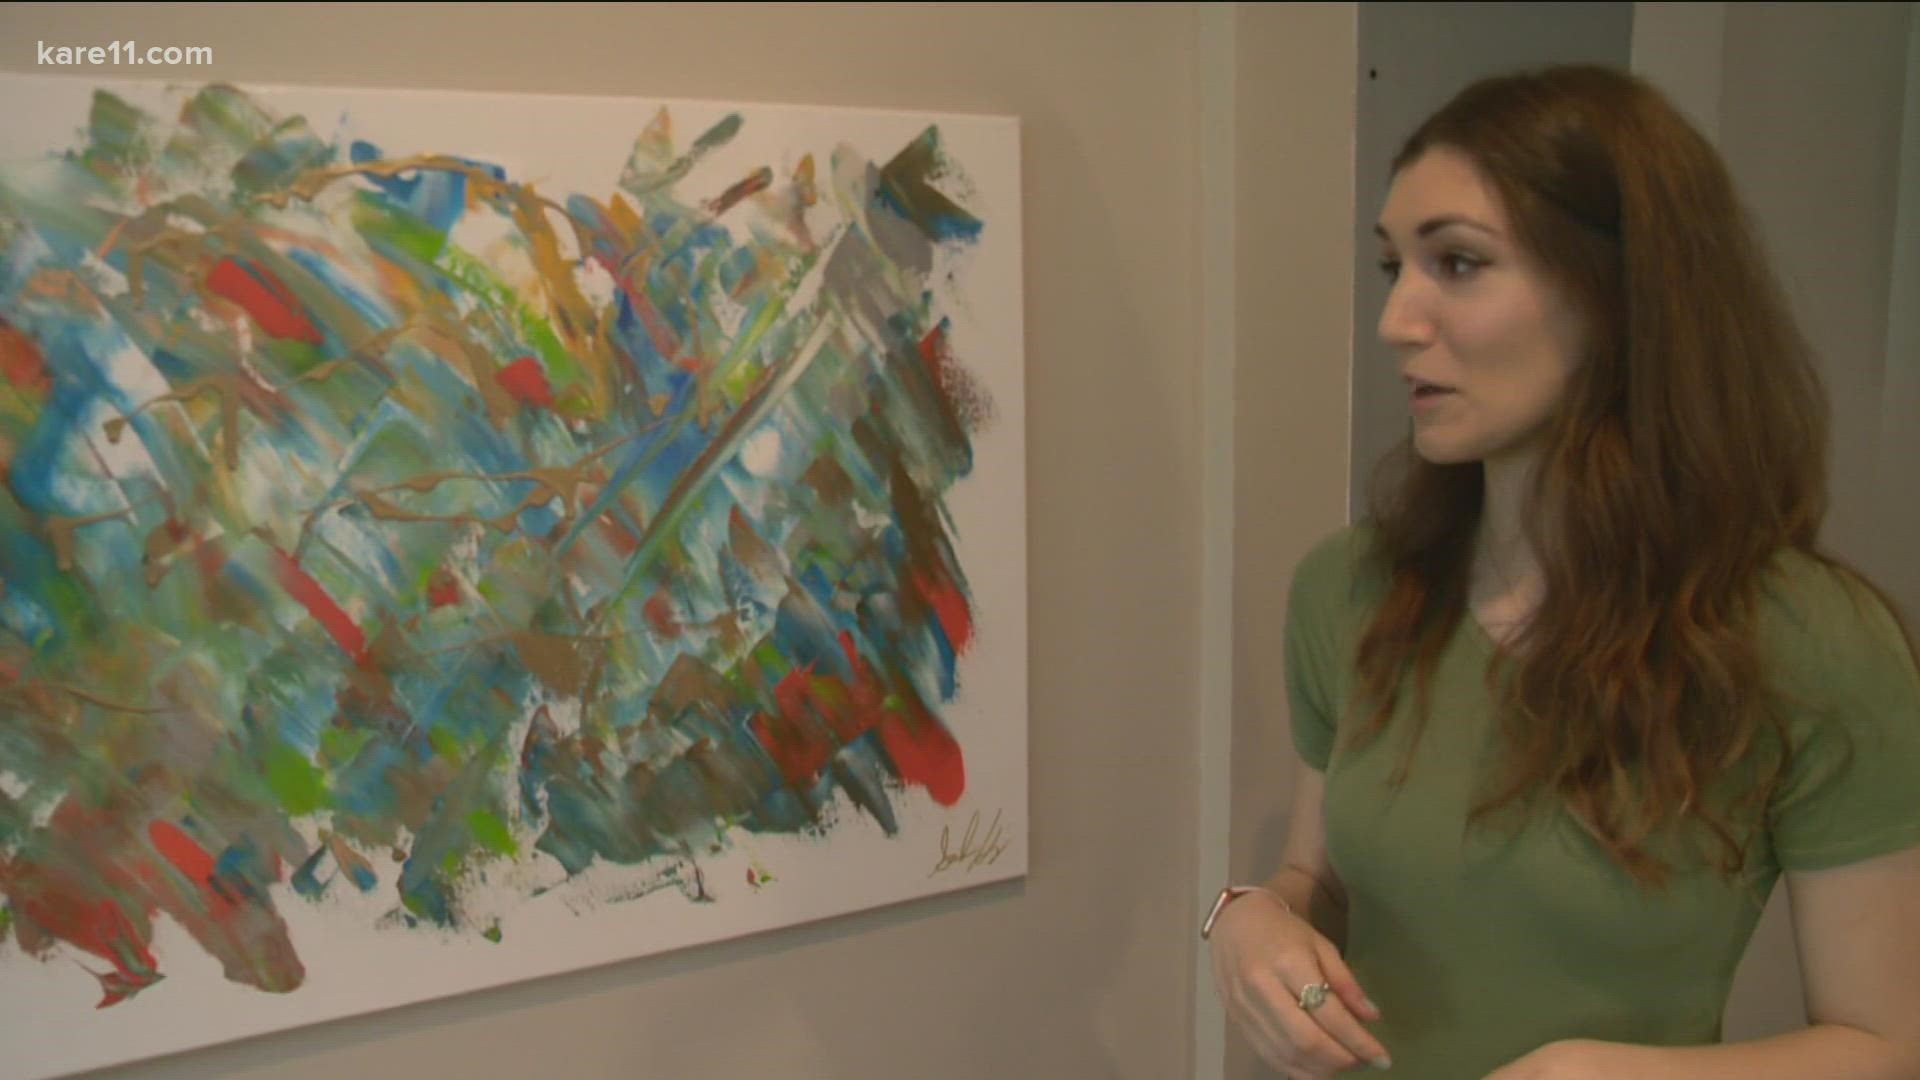 A White Bear Lake artist uses her rare condition to make beautiful art out of music she hears.